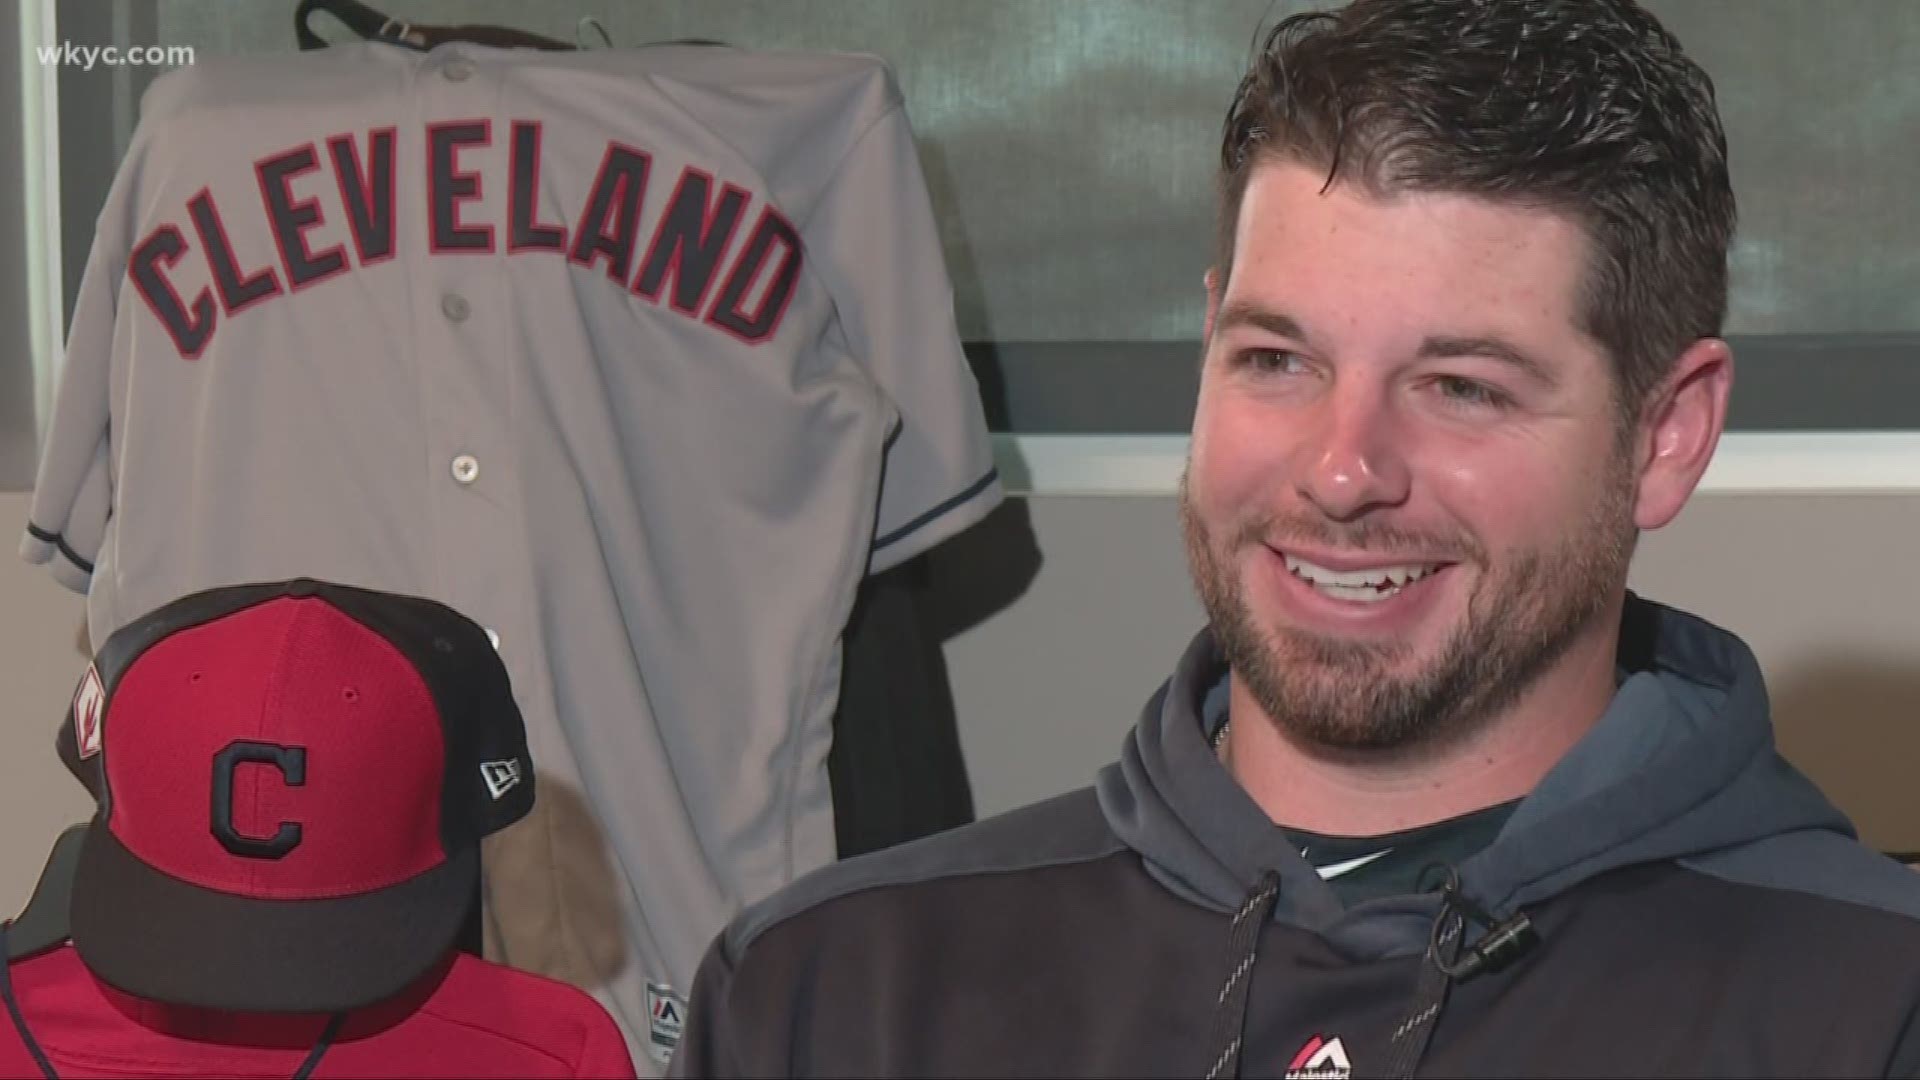 June 3, 2019: We go 'Beyond the Dugout' for an in-depth conversation with Cleveland Indians catcher Kevin Plawecki. Find out why he has a passion for 'Paw Patrol' and Lil Wayne music.